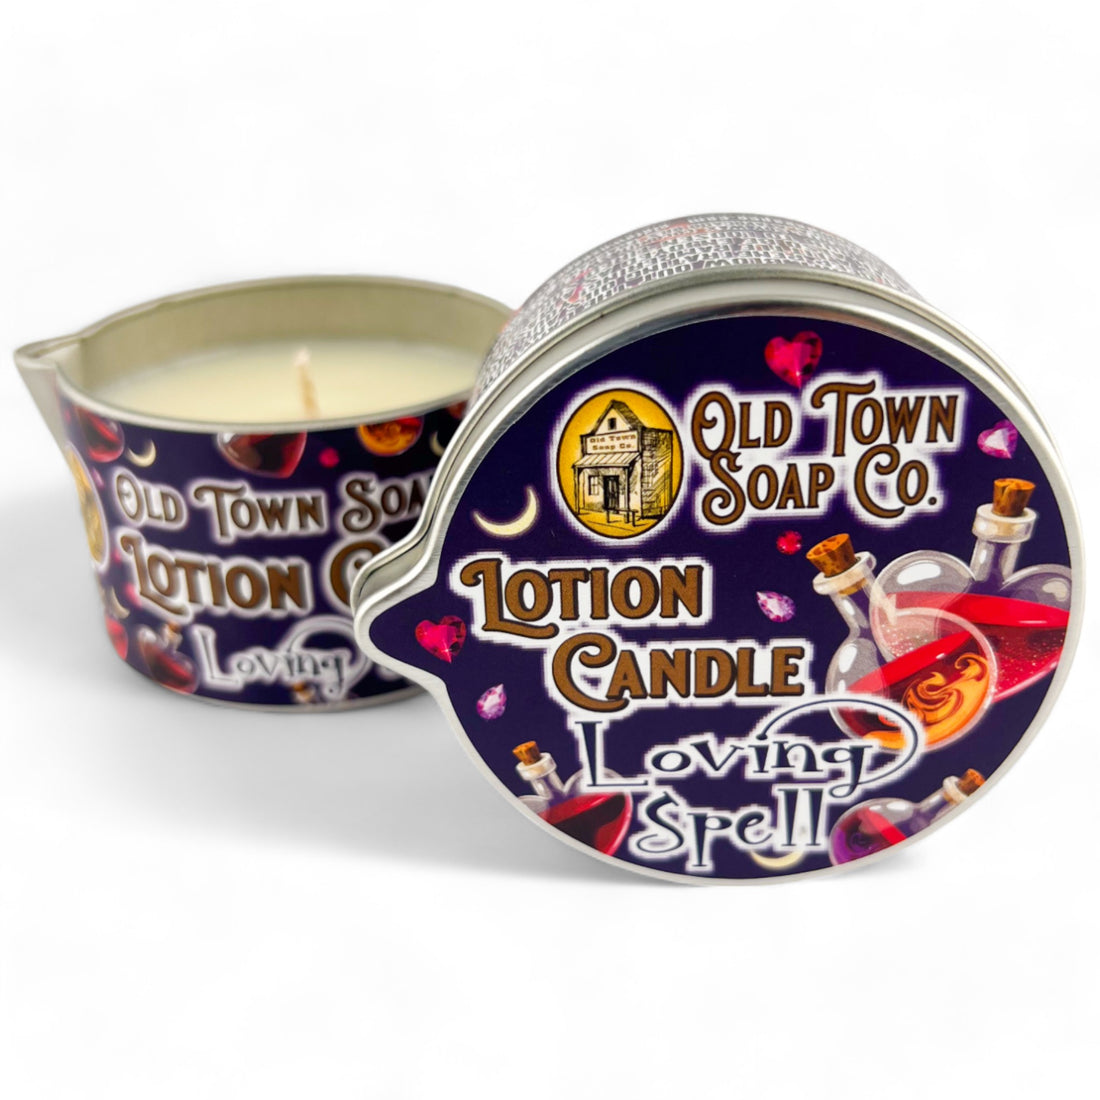 Loving Spell -Lotion Candle - Old Town Soap Co.